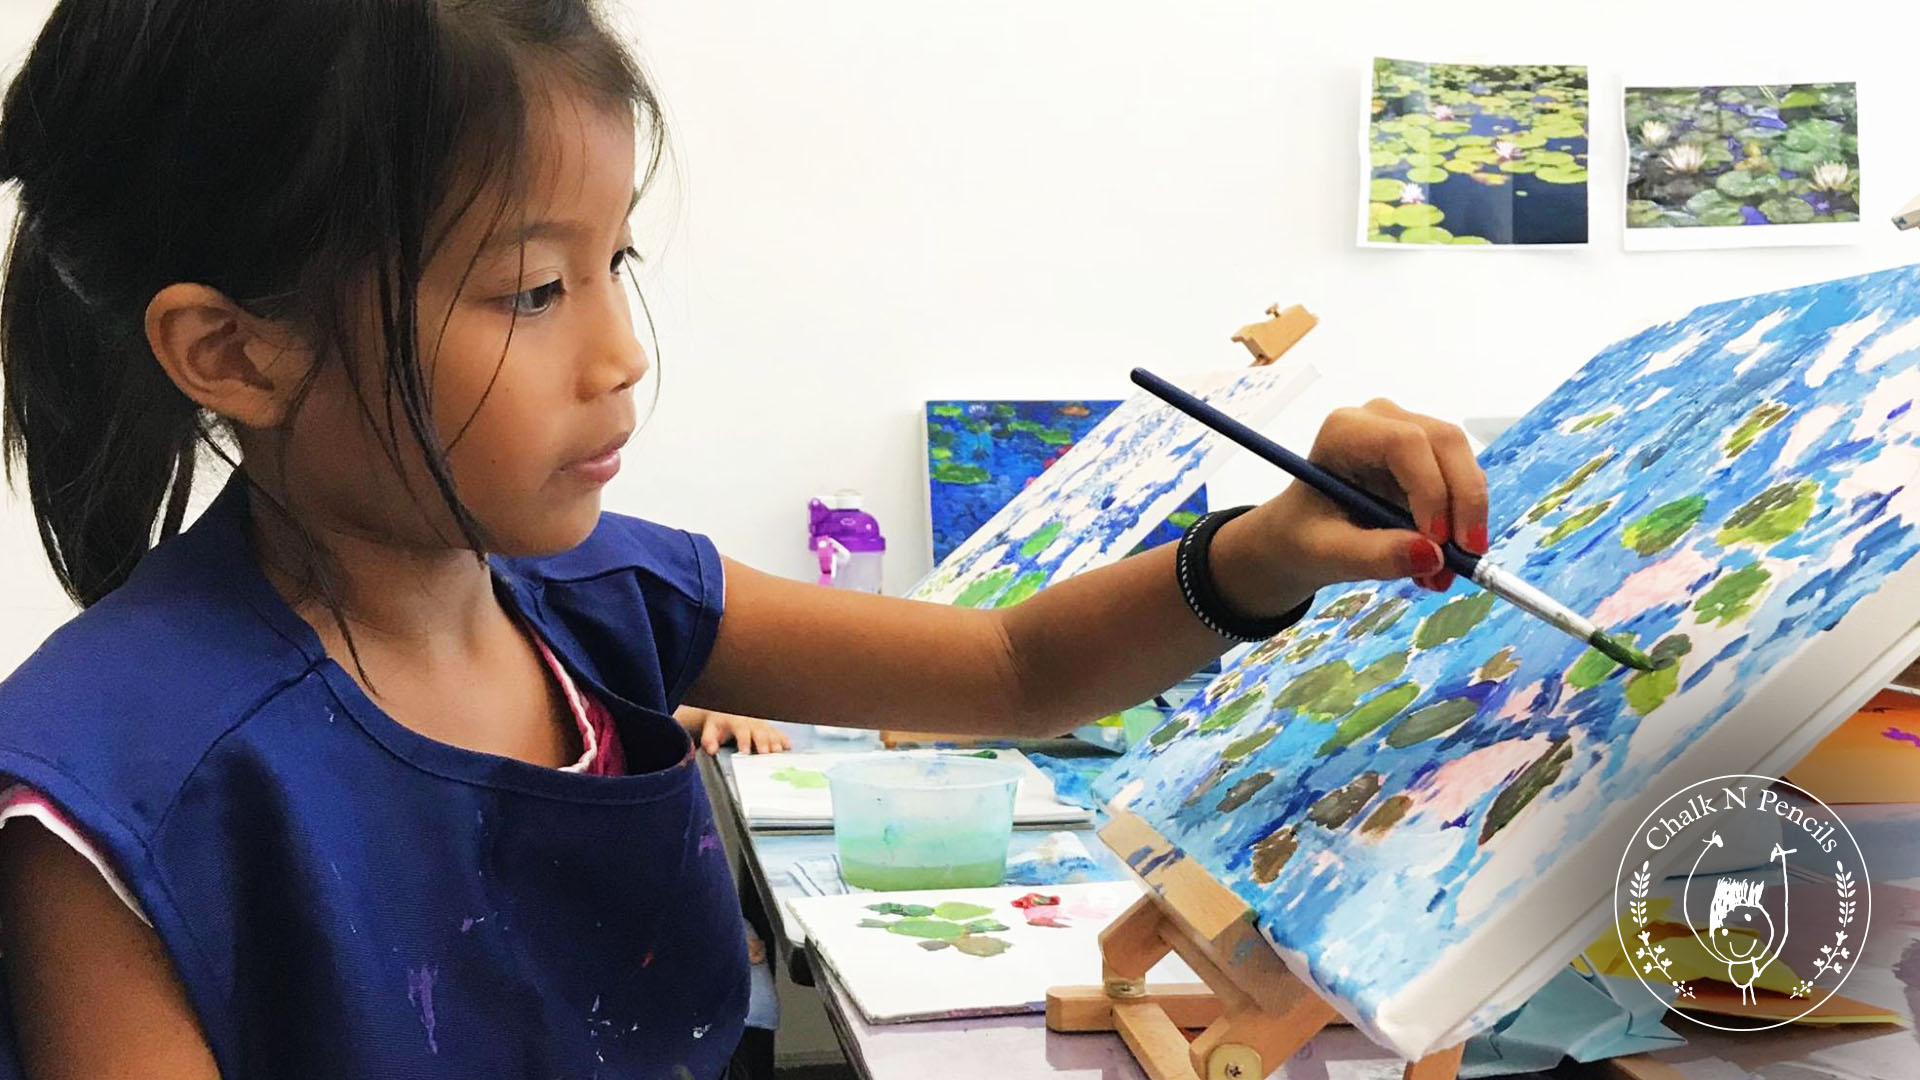 1-Session- AGES 6 - 8: DRAWING AND SELF-EXPRESSION CLASS: HOW TO